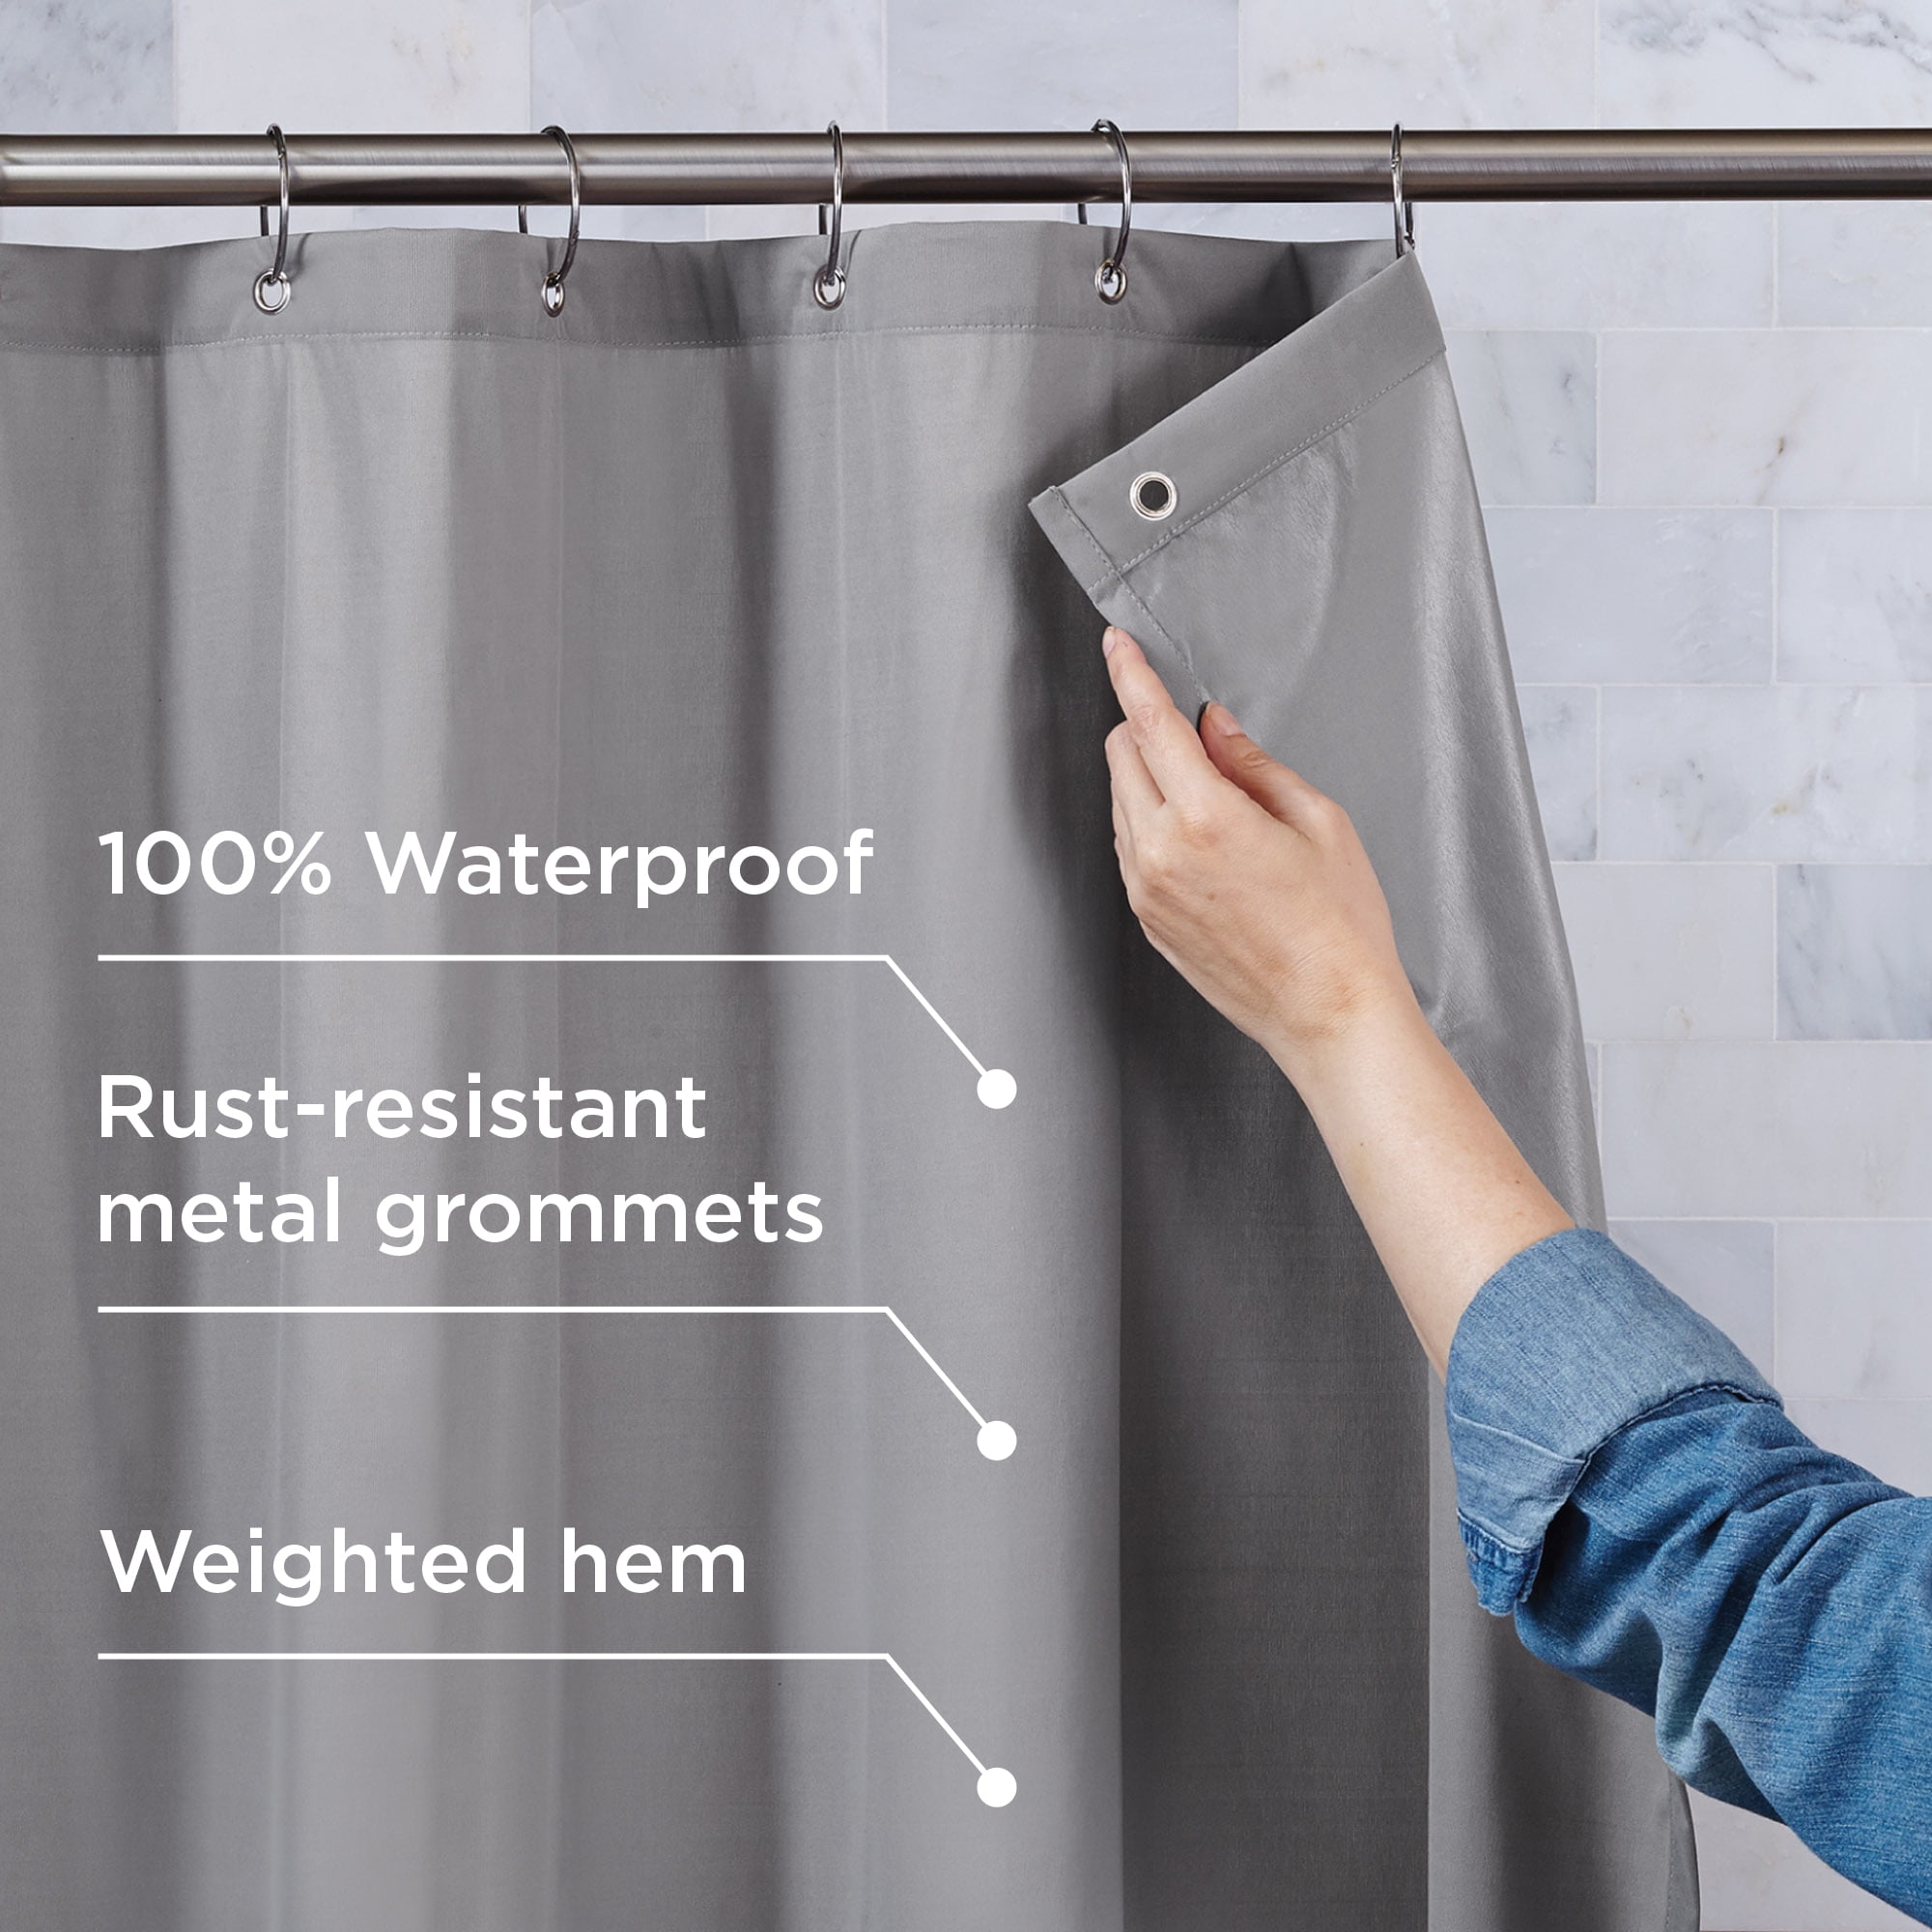 Waterproof Fabric Shower Curtain Or, Does A Fabric Shower Curtain Need Liner